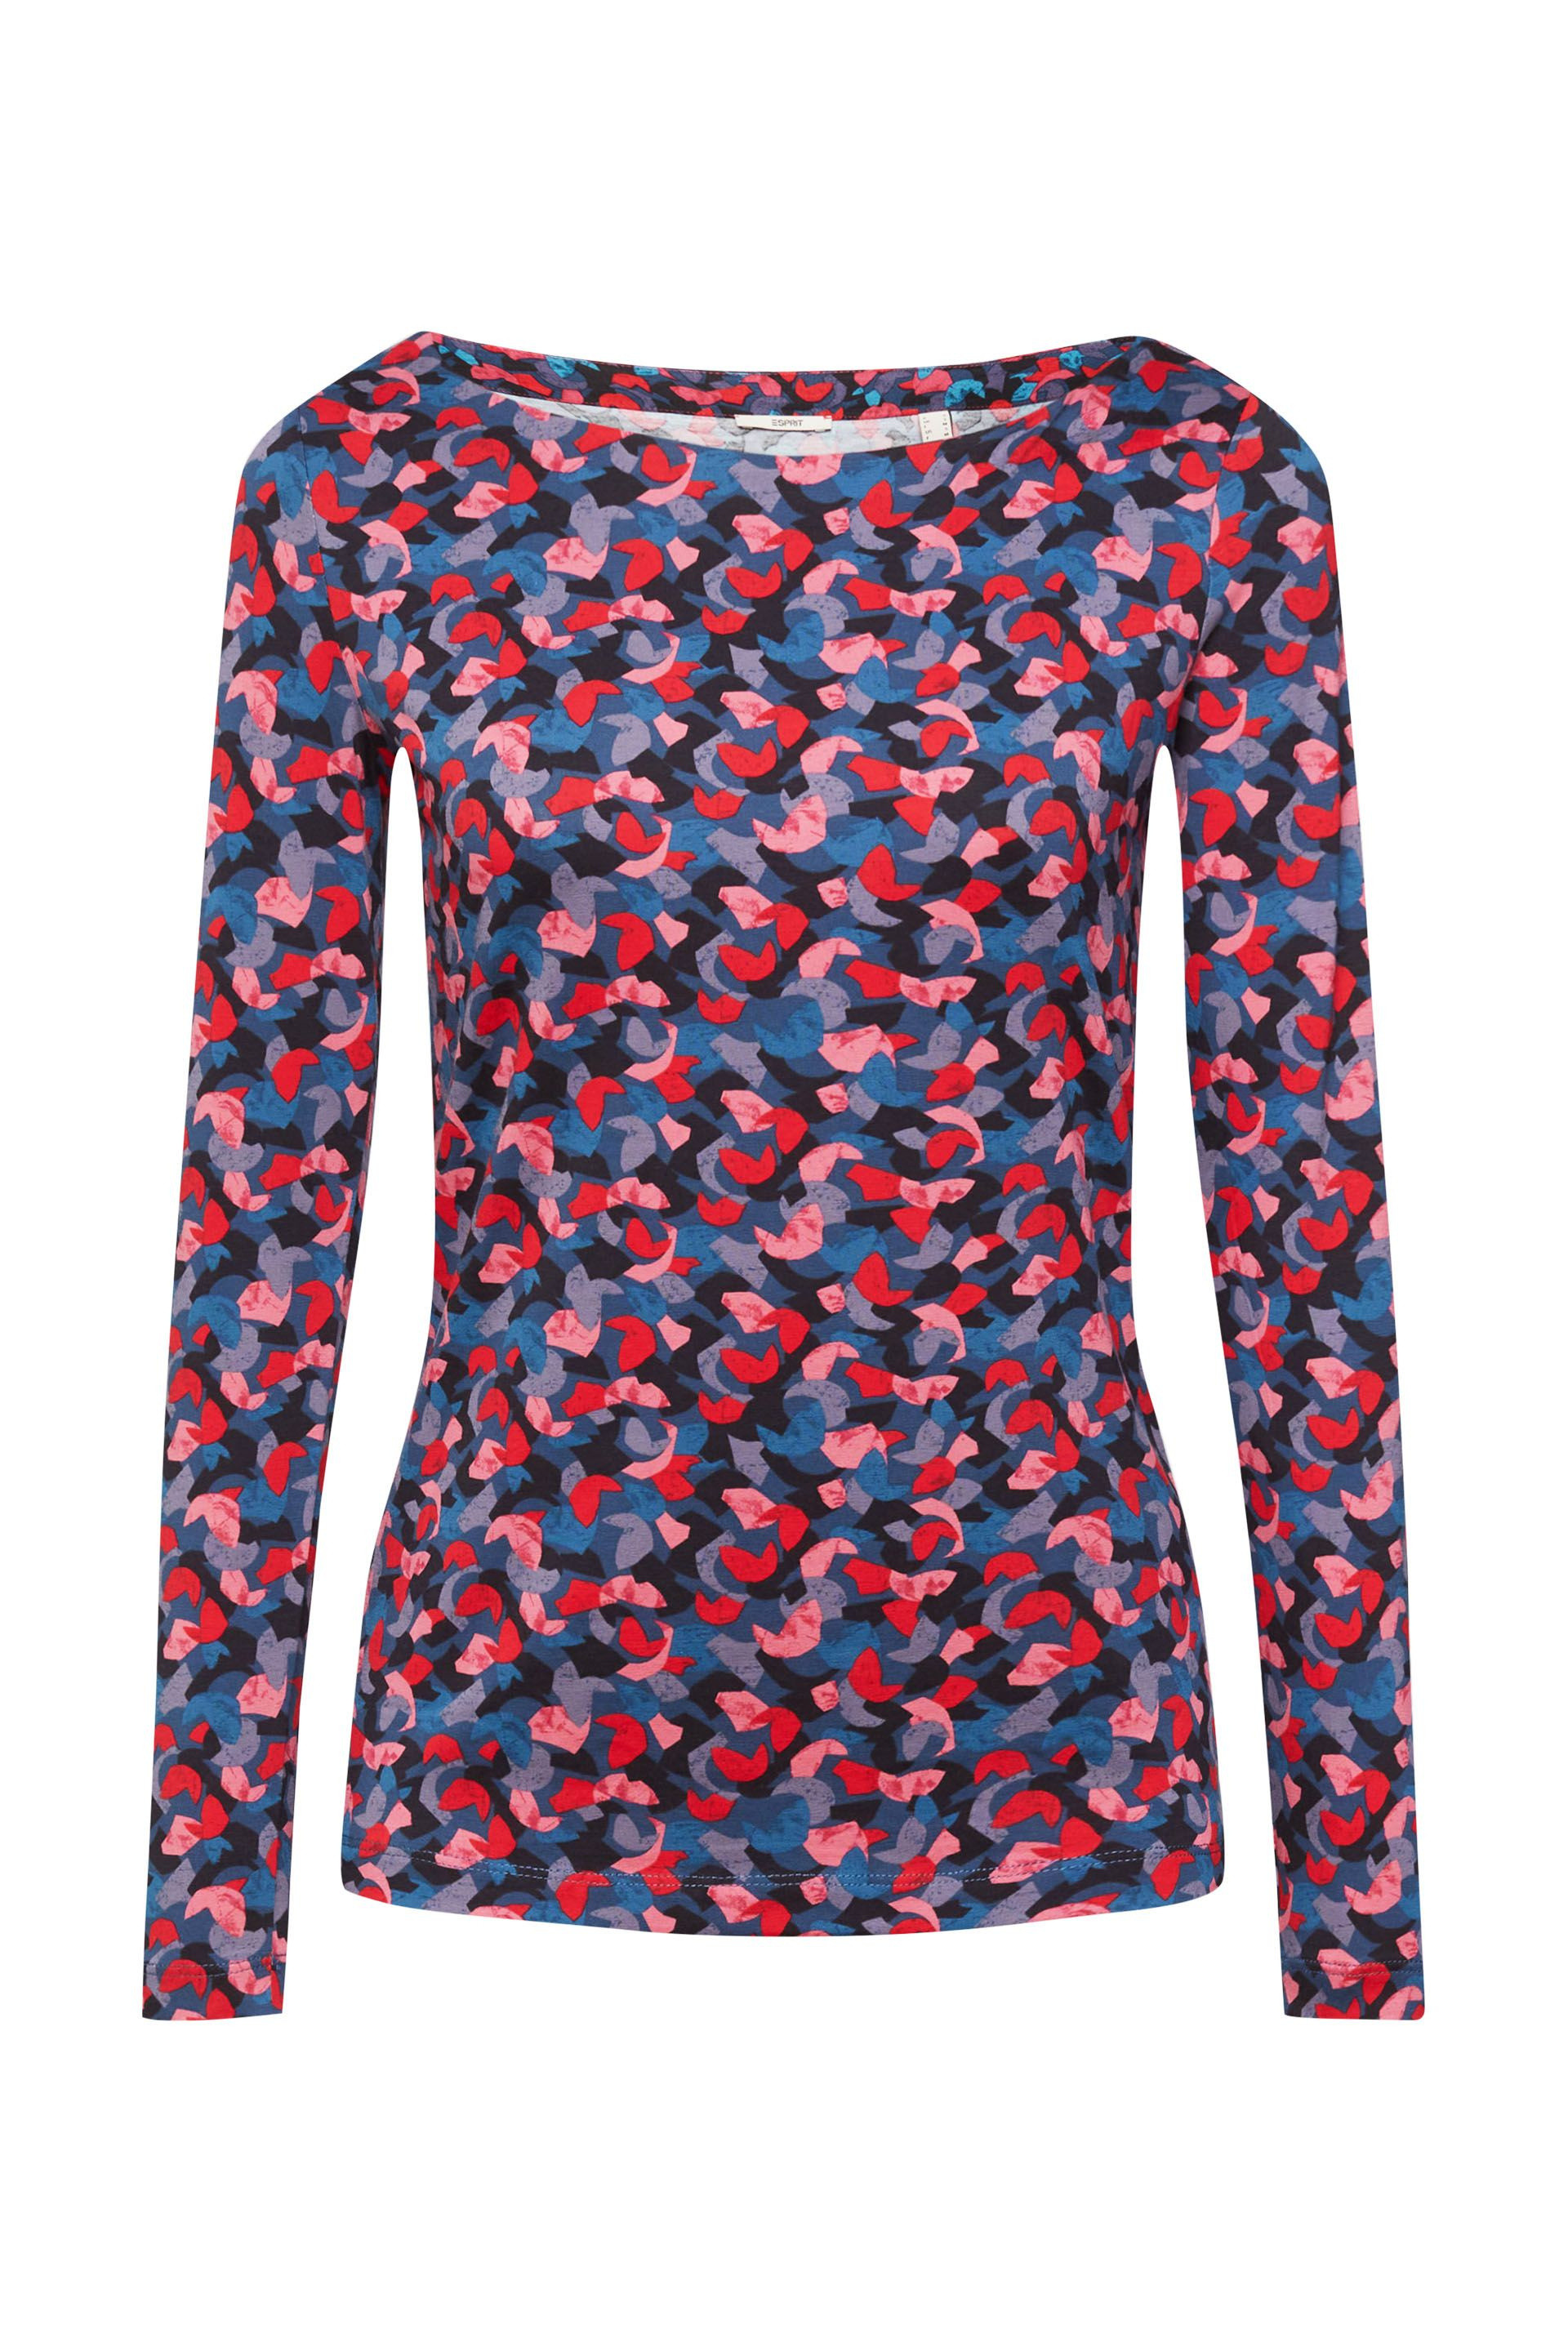 Esprit - T-shirt con stampa all over in misto cotone, Multicolor, large image number 0